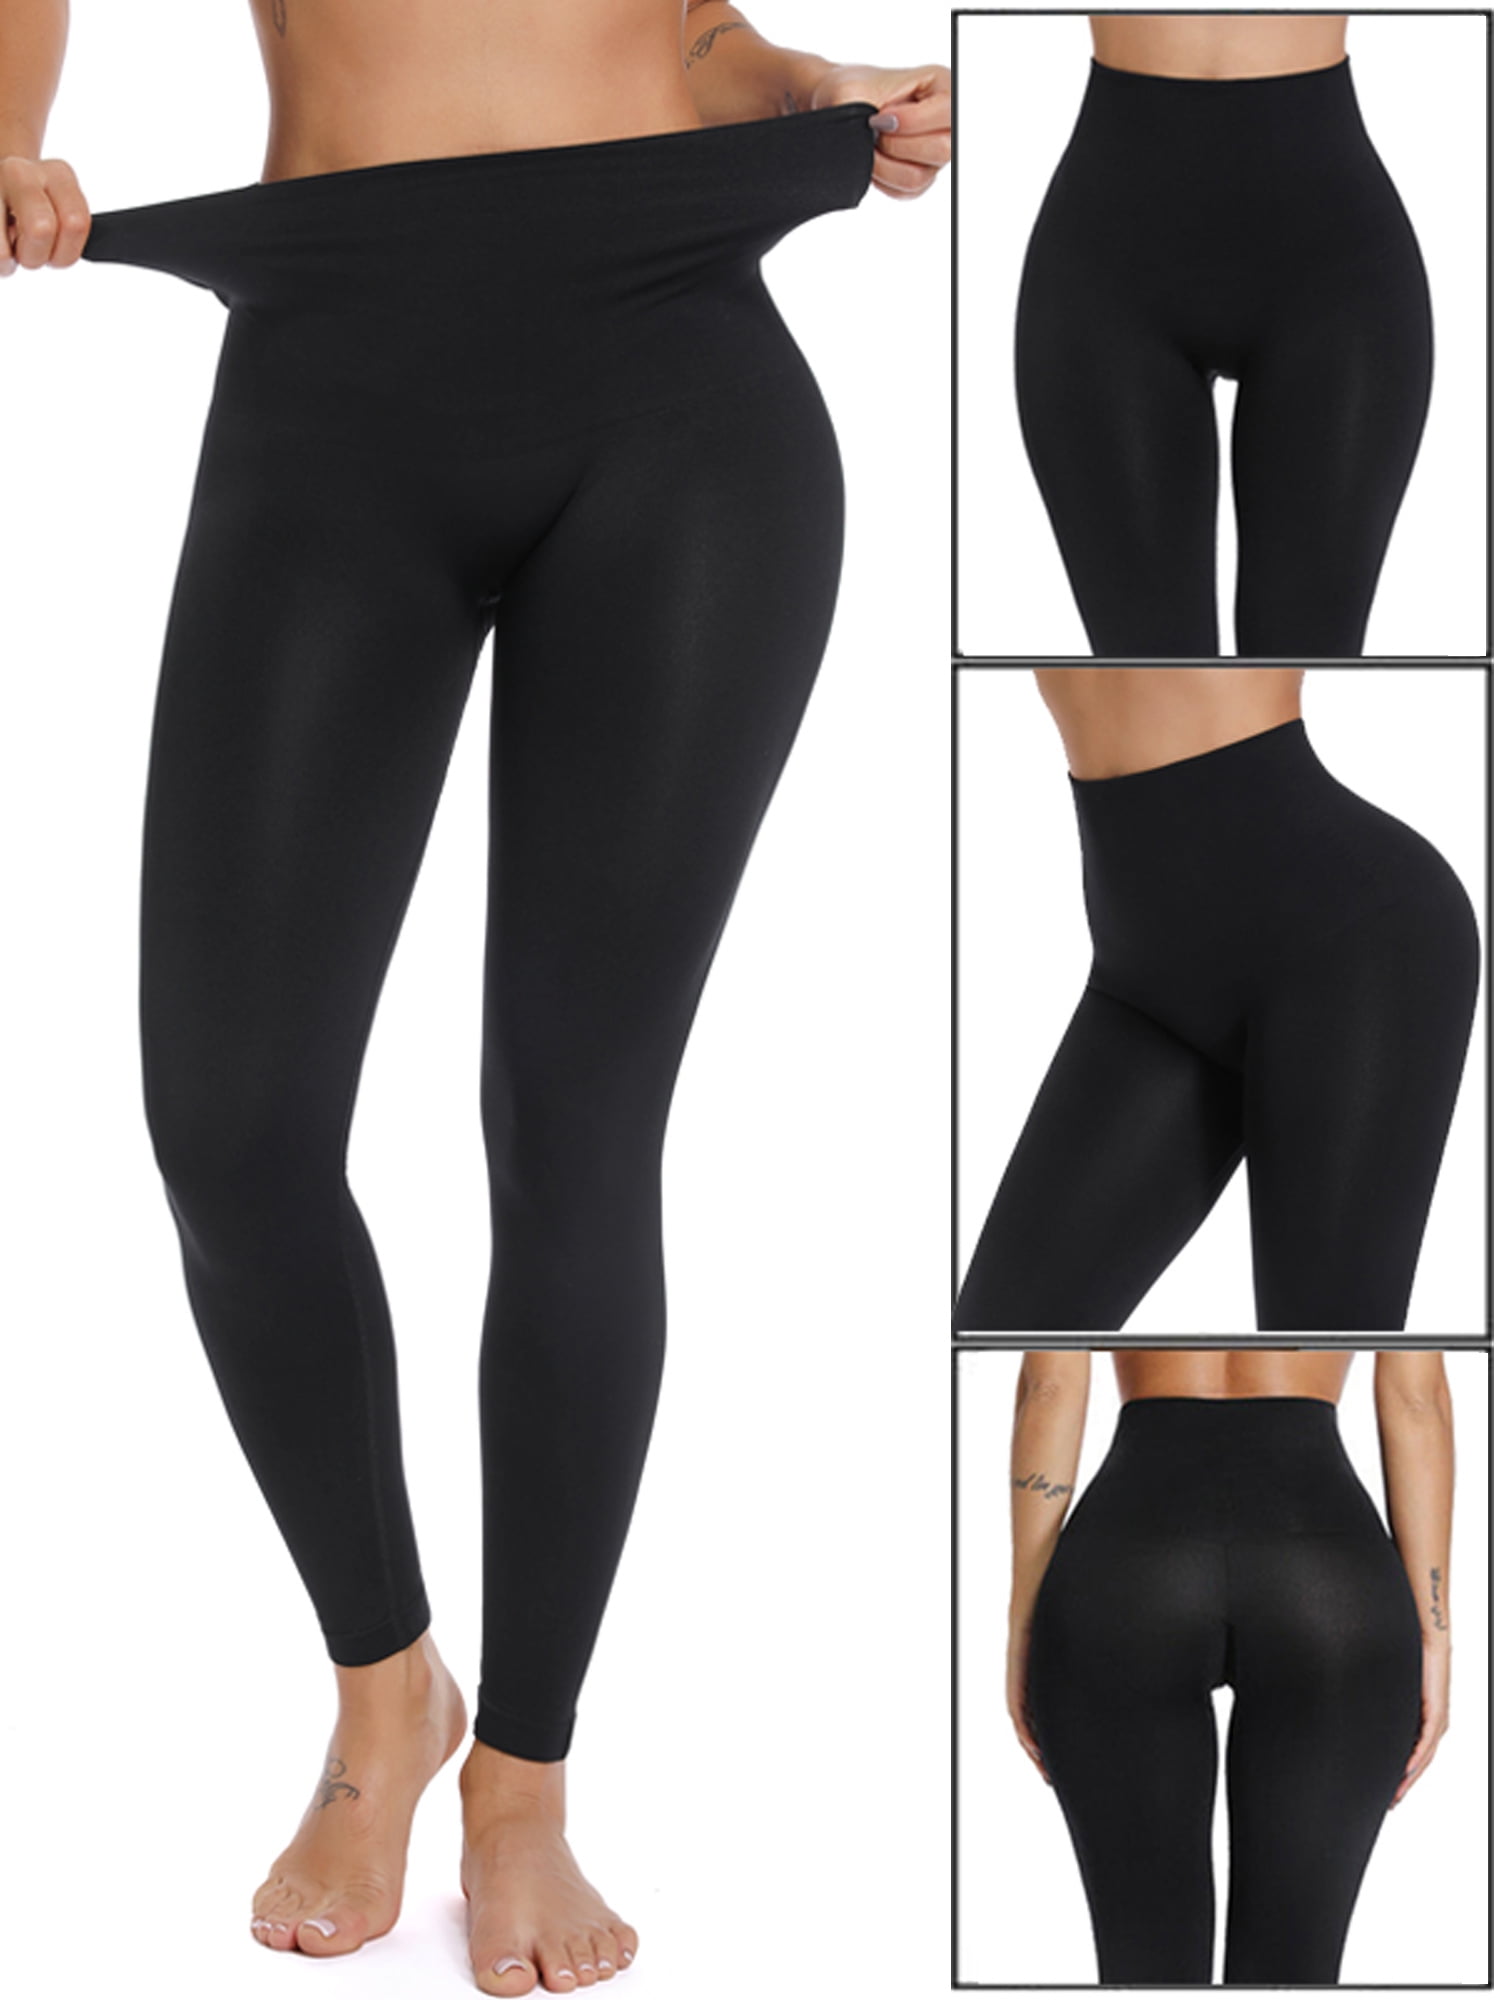 FITVALEN Seamless High Waisted Compression Leggings Anti-Cellulite